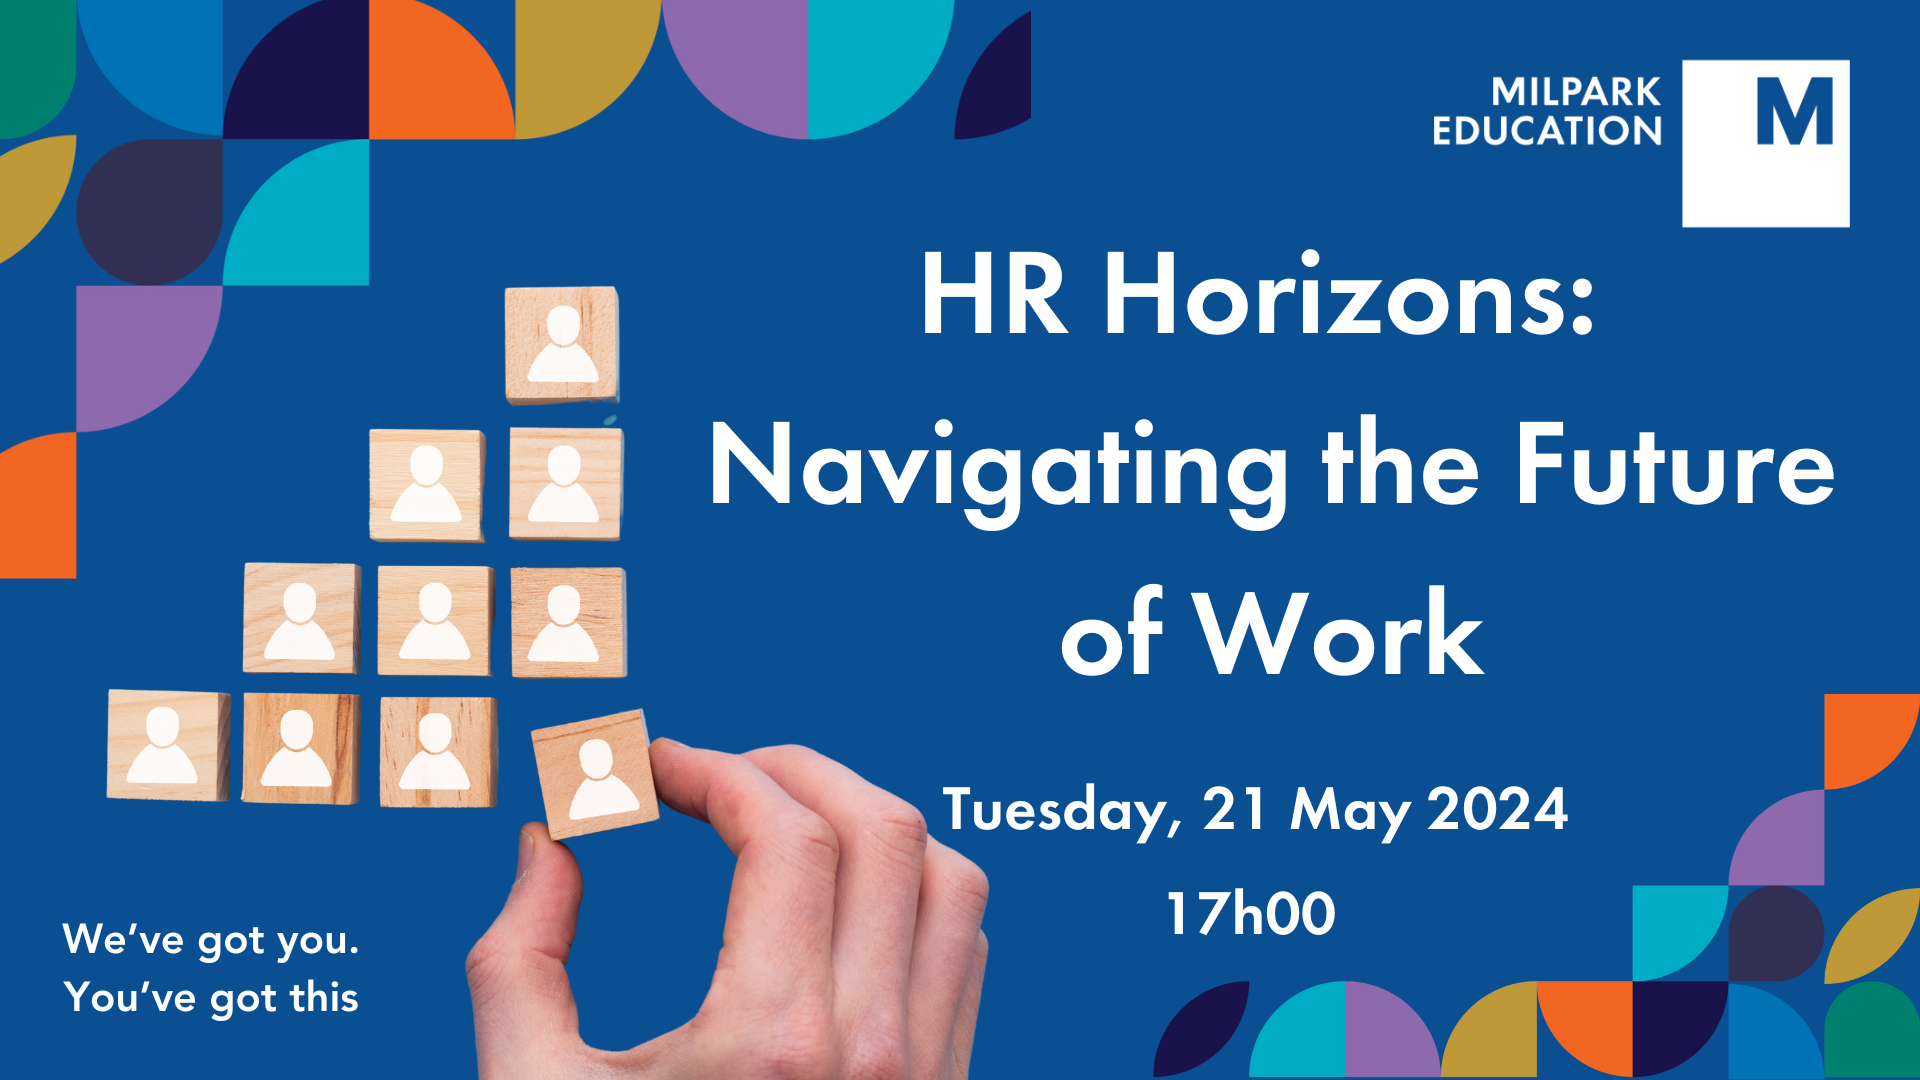 HR Horizons: Navigating the Future of Work event cover photo